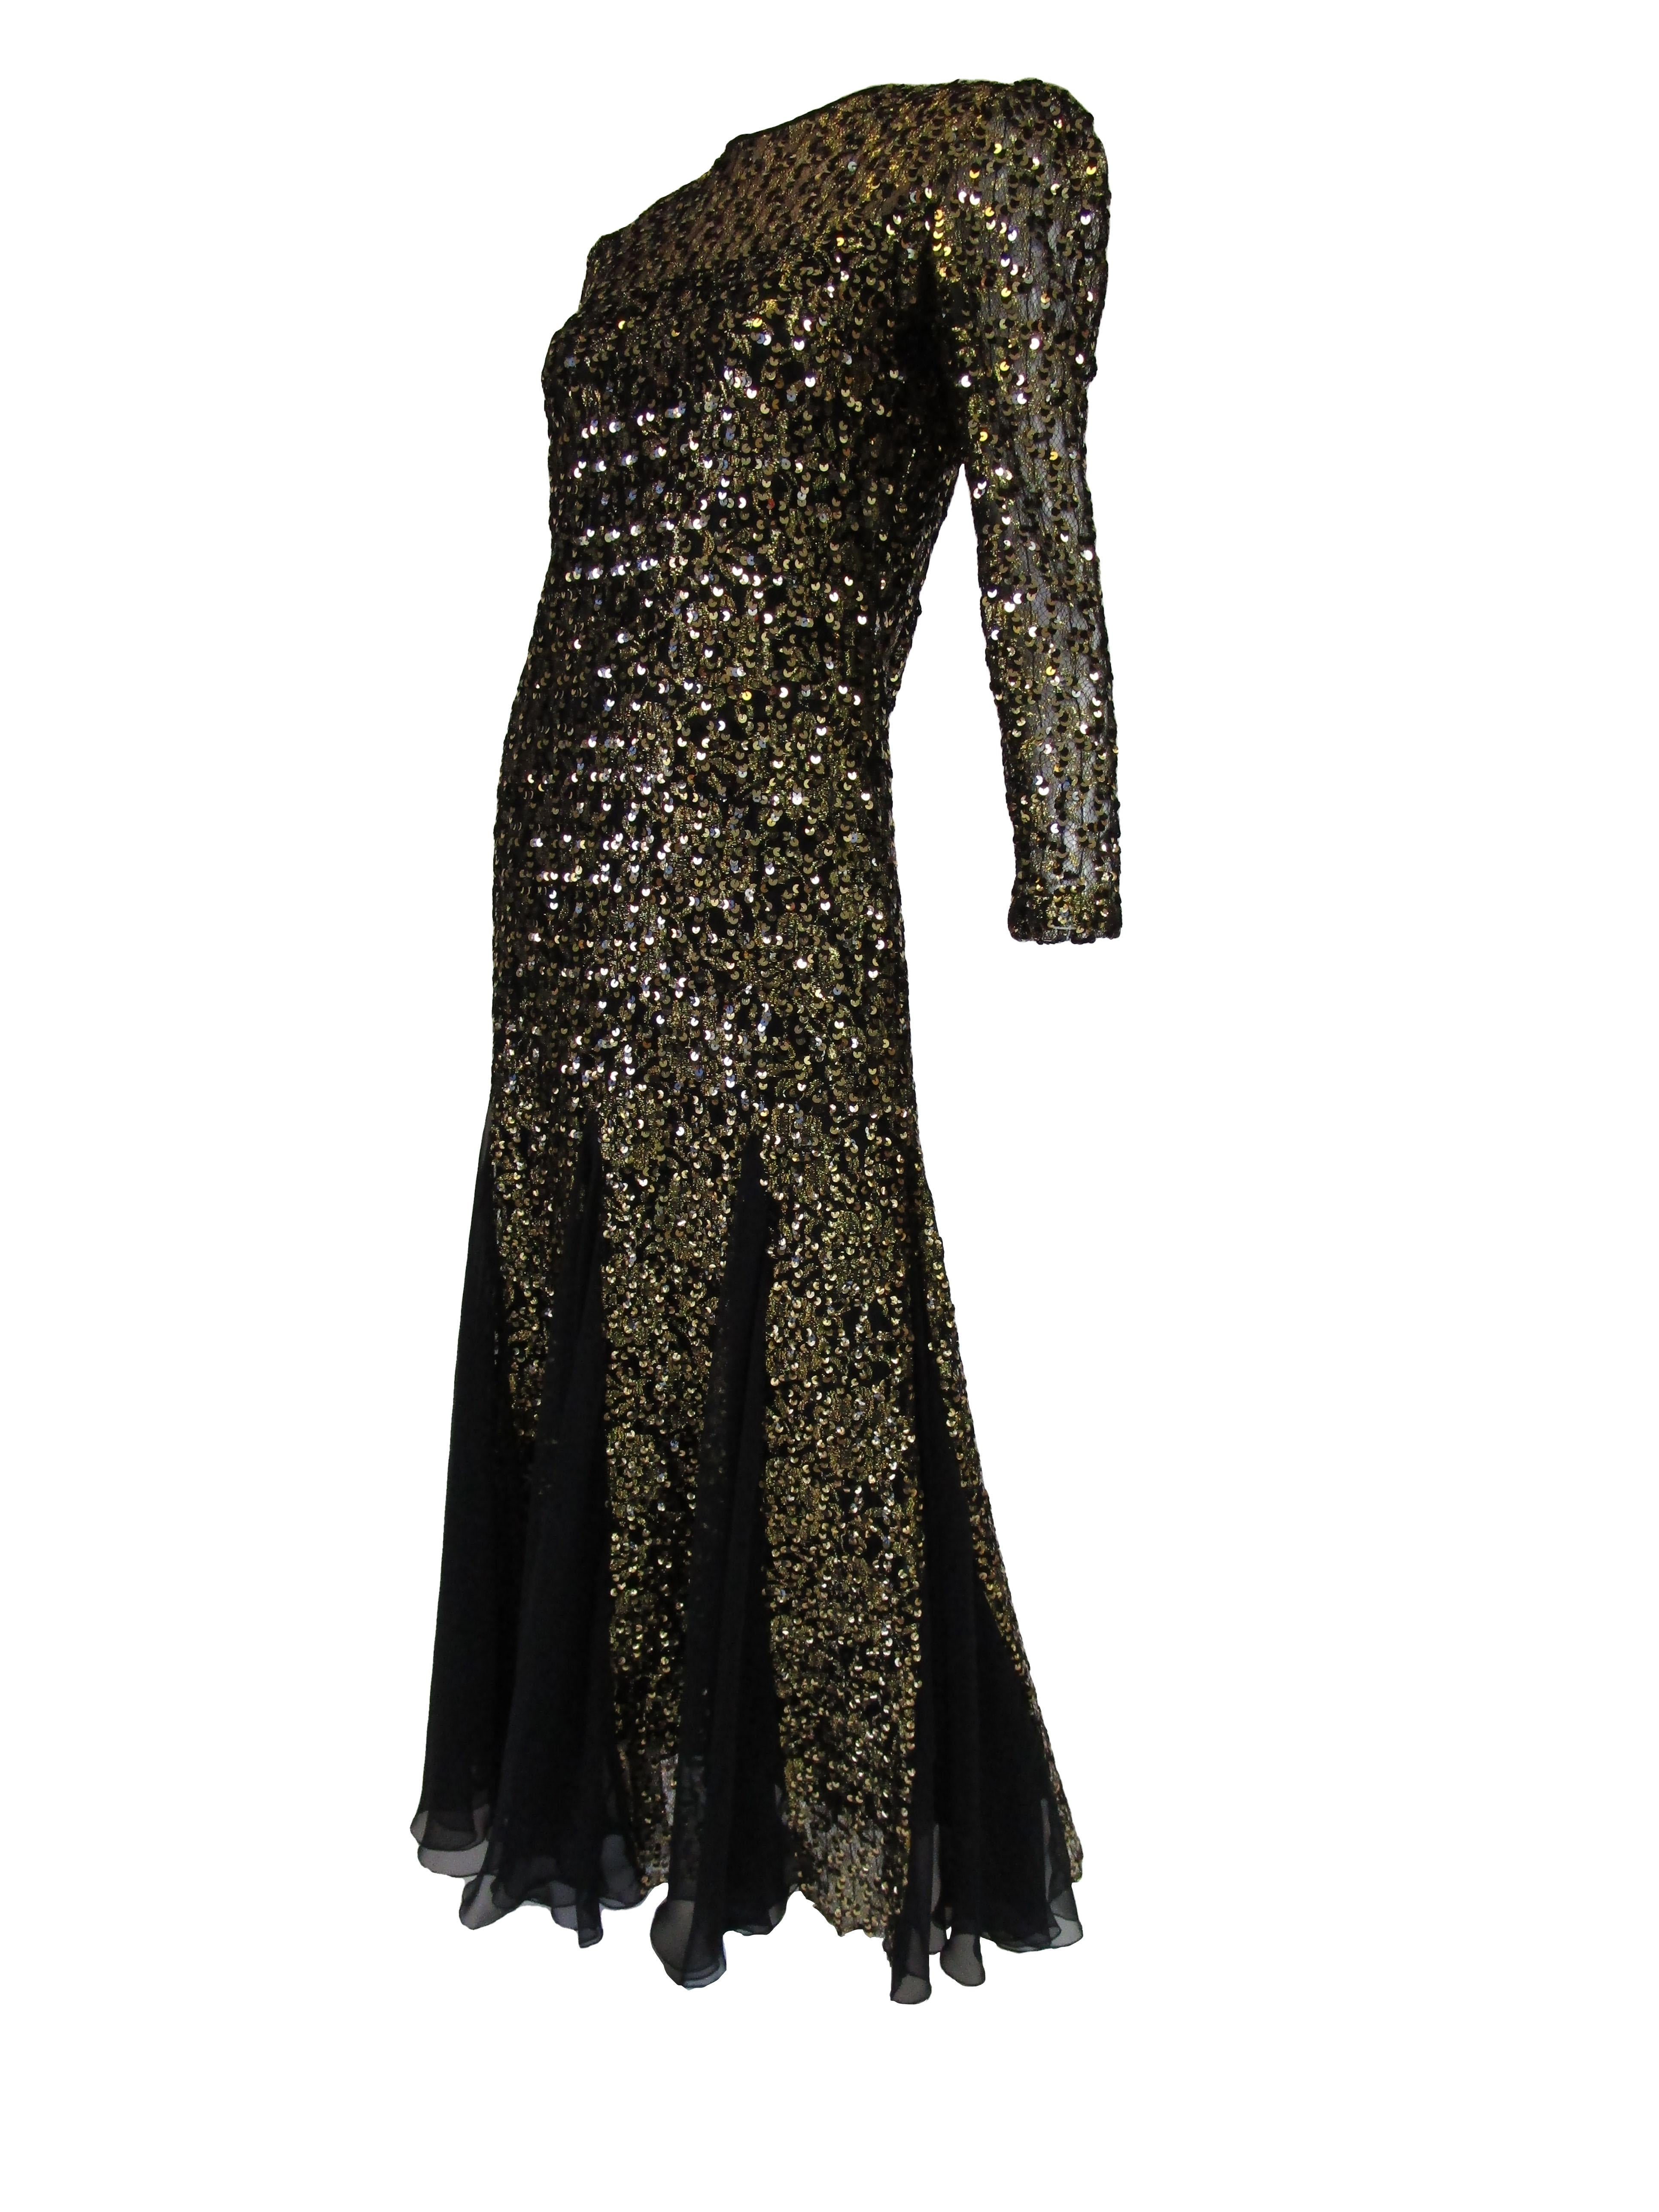 1980s Richilene Black and Gold Sequined Evening Dress  For Sale 1